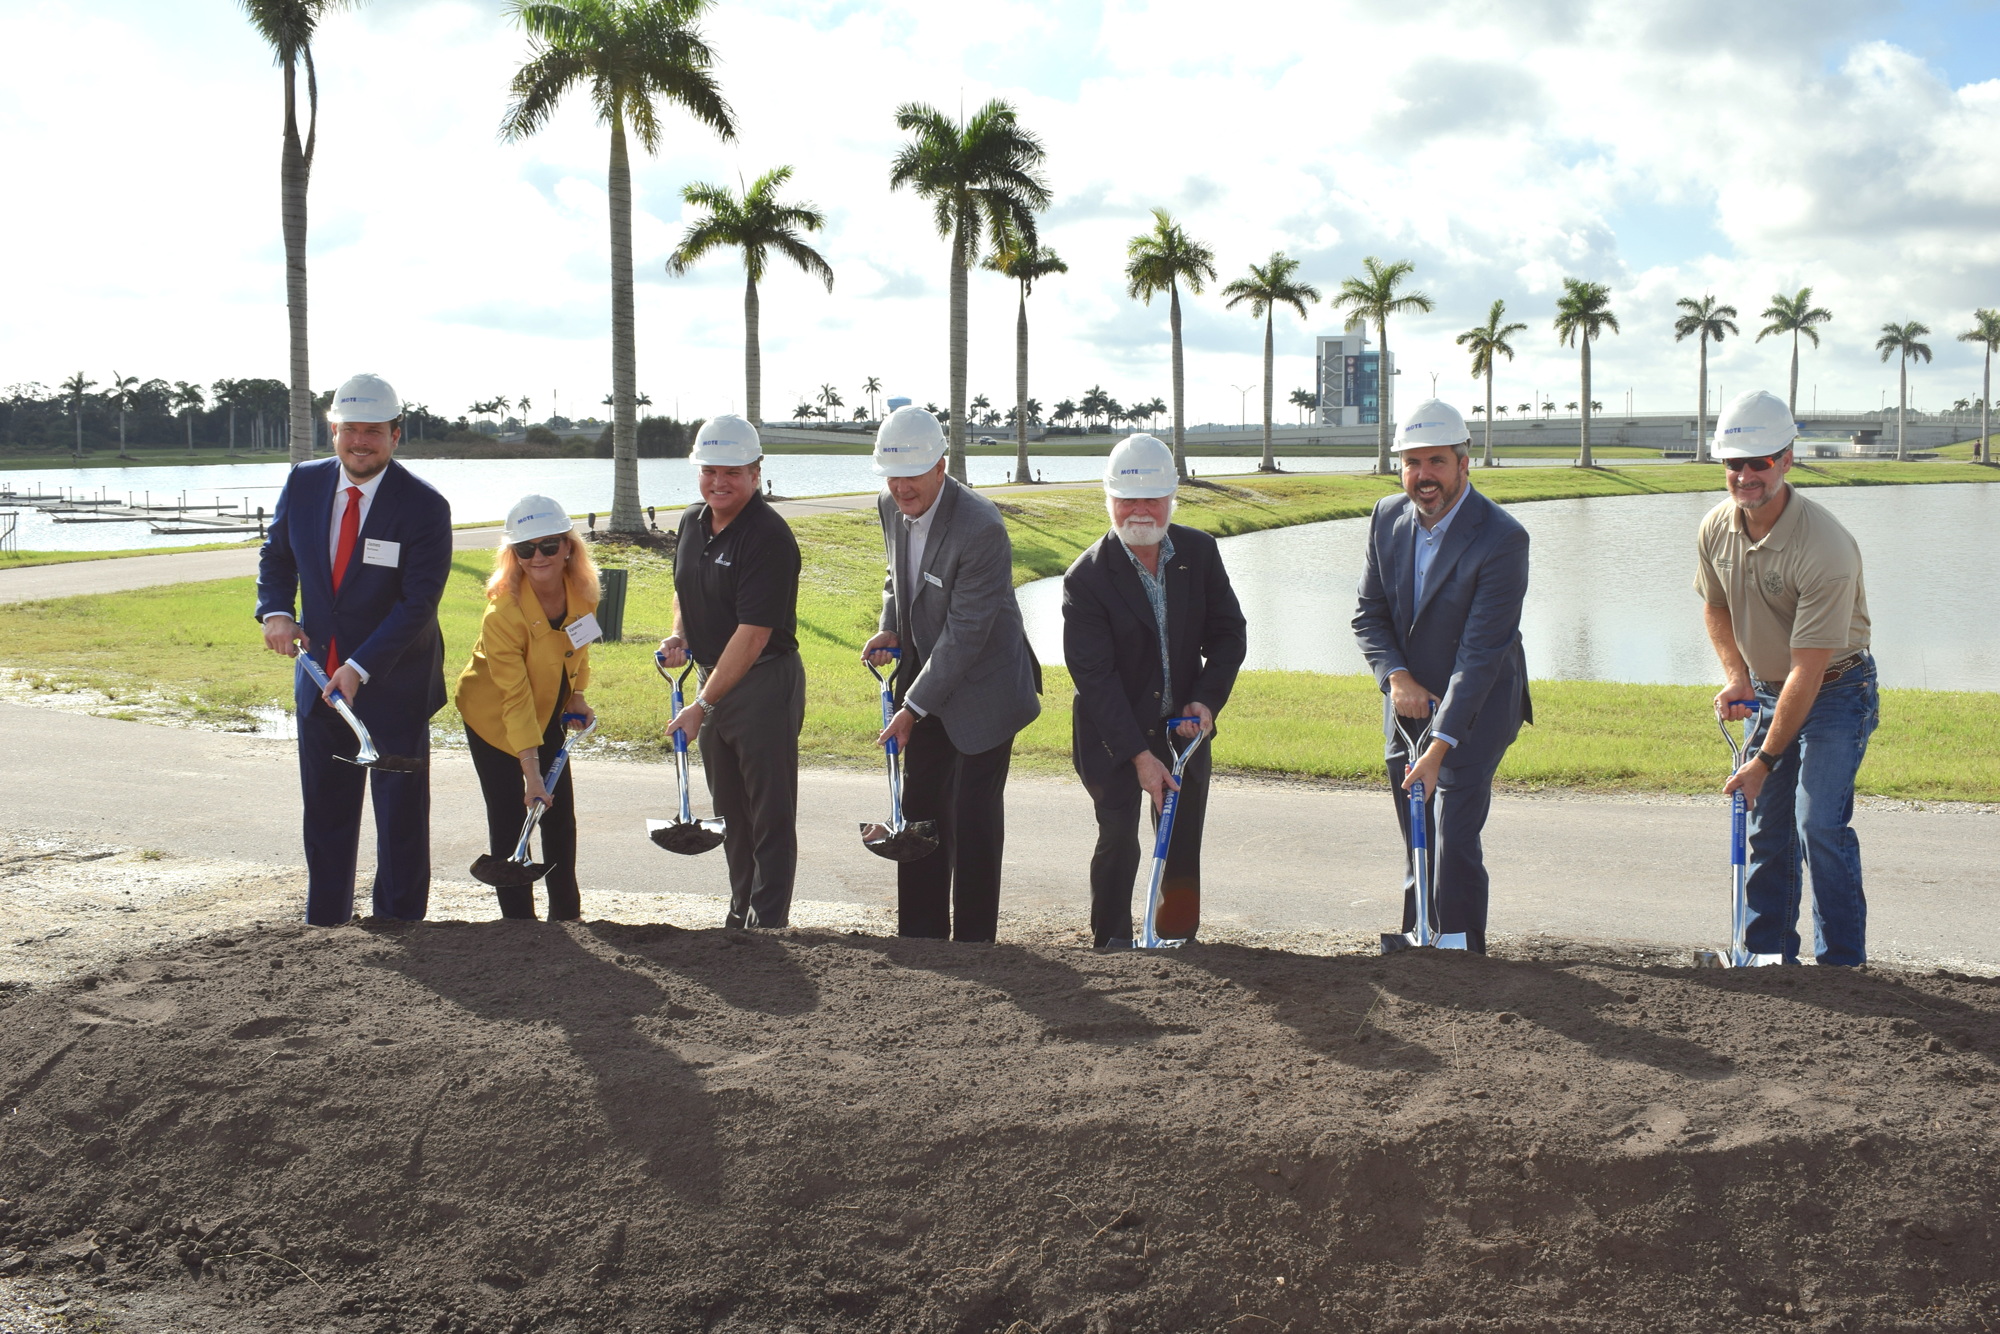 Mote leaders joined local and state officials to celebrate the groundbreaking of the aquarium project in November. To date, work on the site has focused preliminary improvements such as construction of a parking lot.